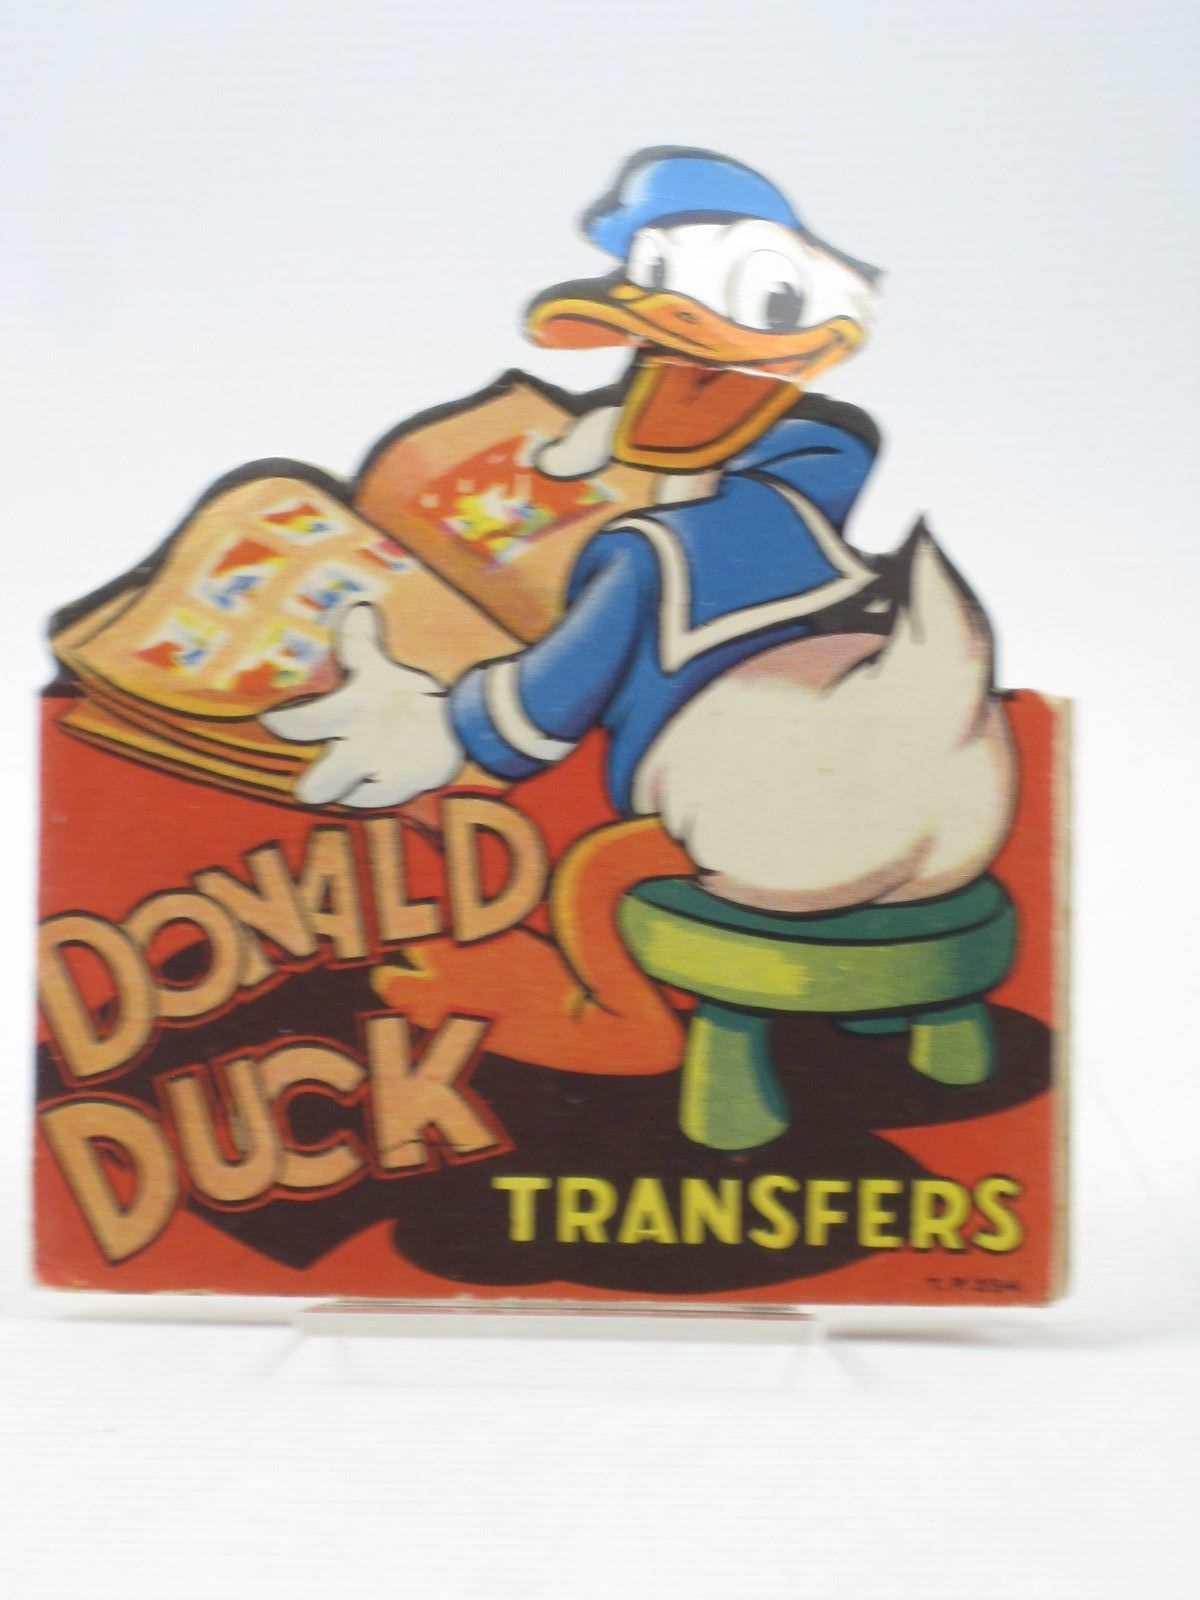 Photo of DONALD DUCK TRANSFERS published by Tower Press (STOCK CODE: 1402693)  for sale by Stella & Rose's Books